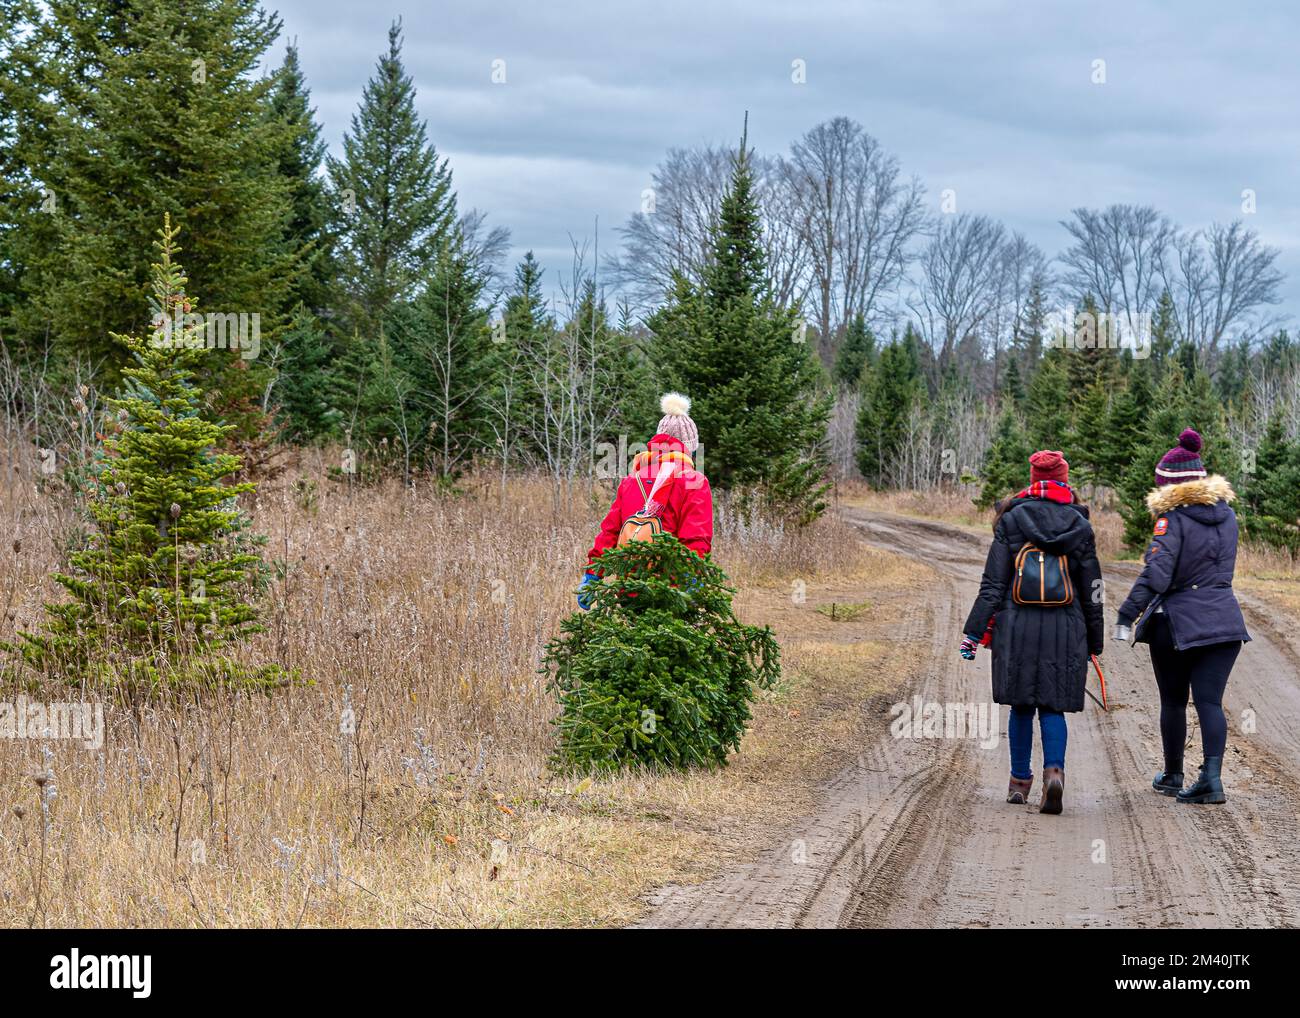 Christmas Tree Farm near Barrie, Ontario. Searching for the most beautiful tree for the Christmas tradition. Stock Photo